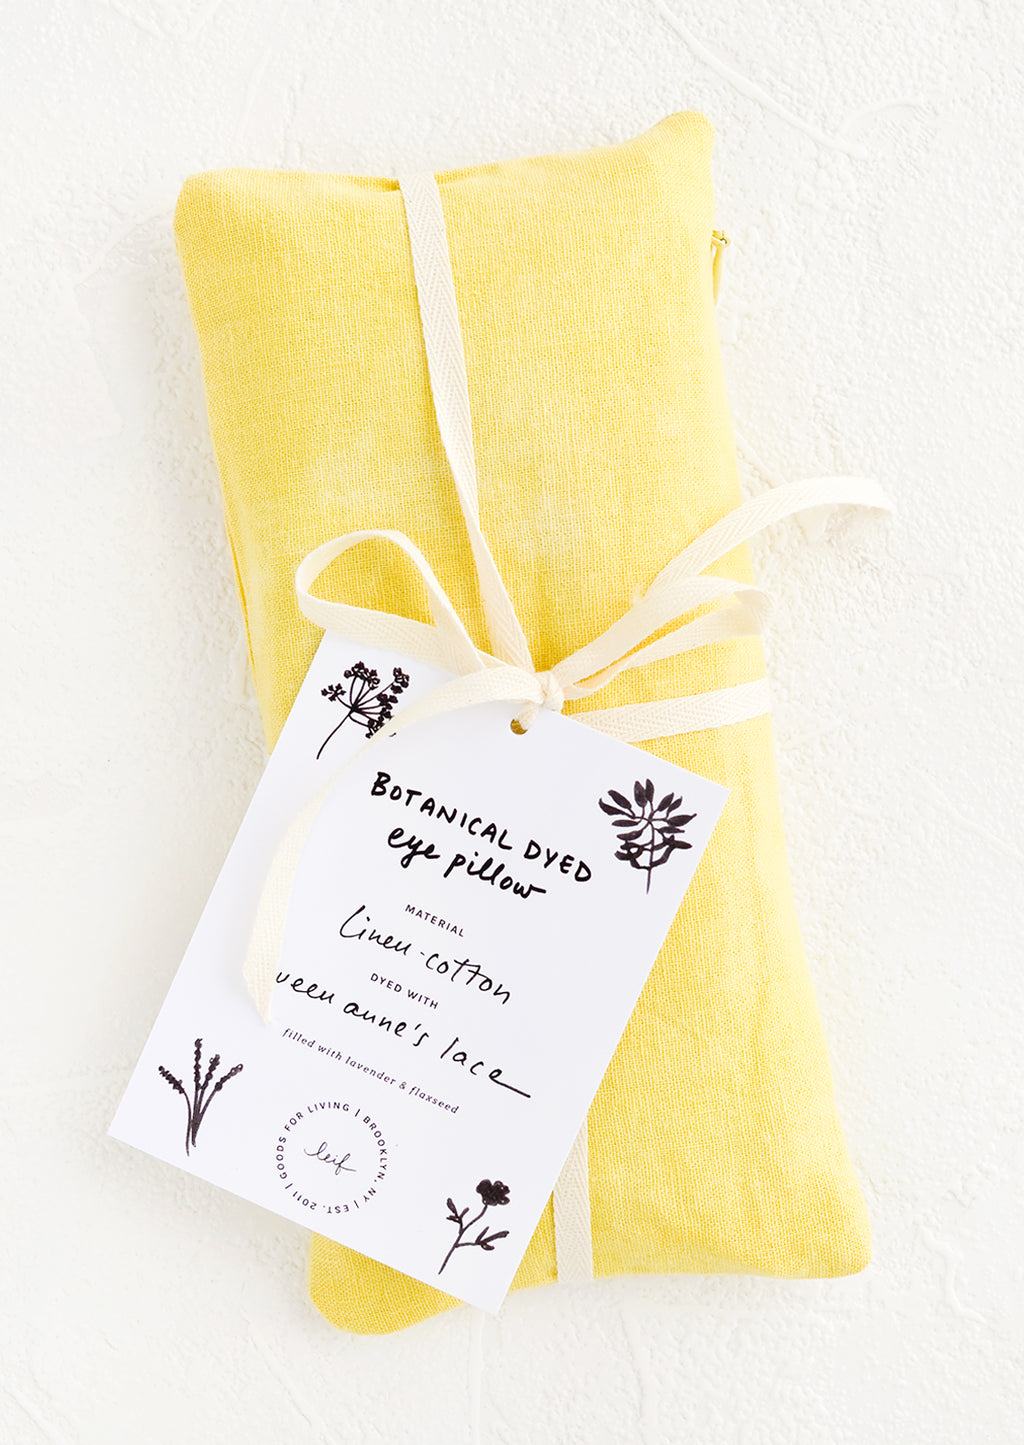 Queen Anne's Lace: A naturally dyed relaxation eye pillow in yellow color dyed using Queen Anne's Lace.